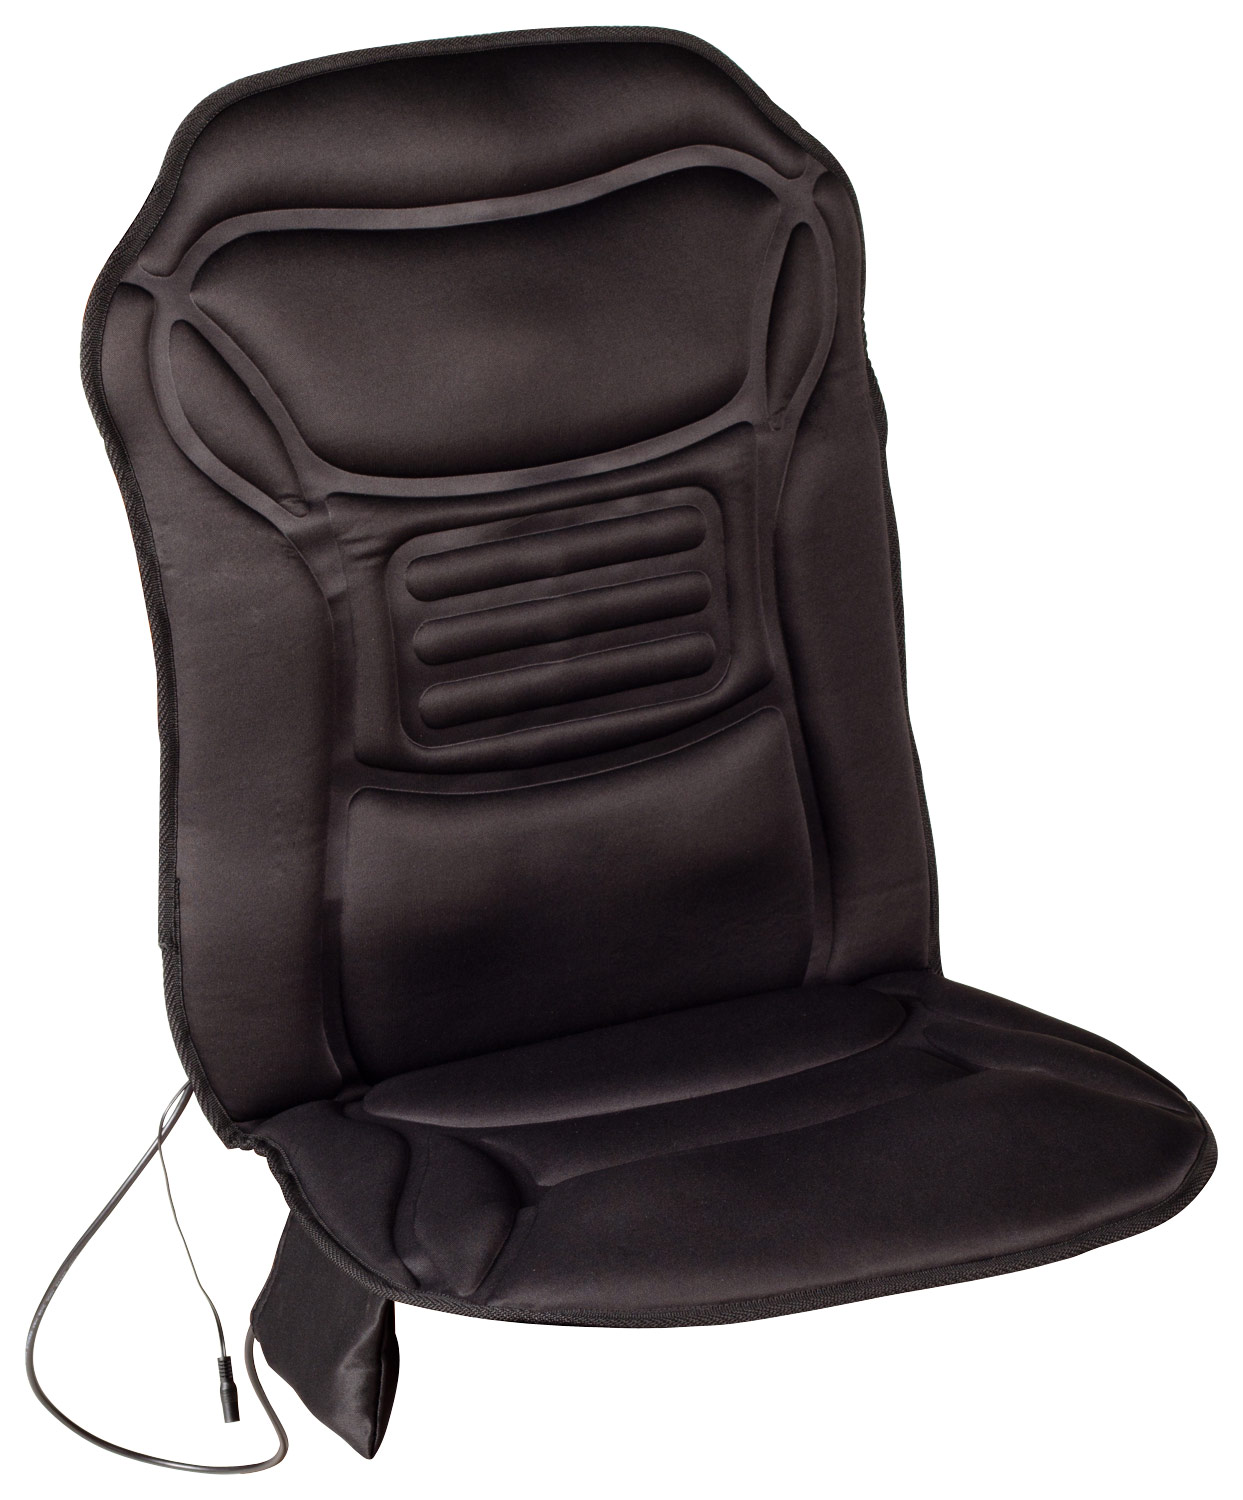 Heated Massage Seat Cushion was $41.99 now $32.99 (21.0% off)